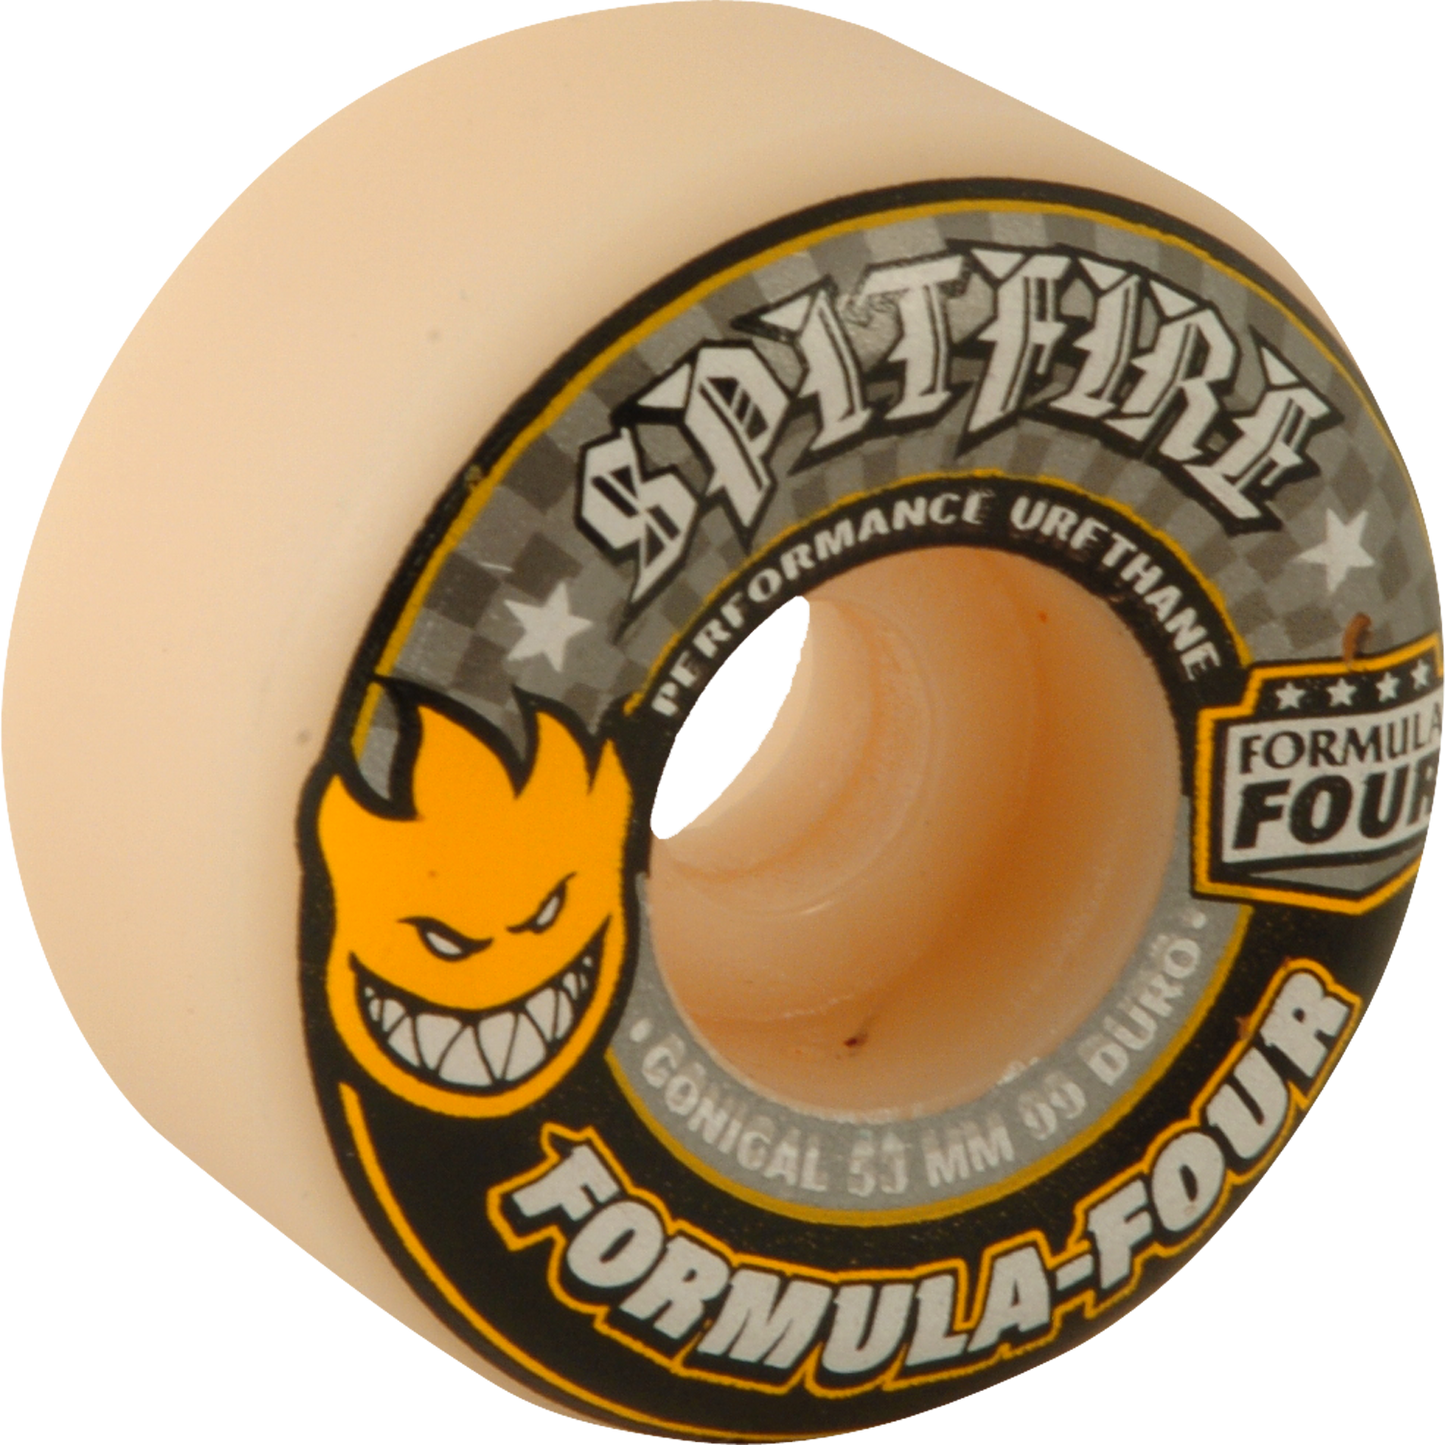 Spitfire F4 99a Conical 53mm White W/Yellow & Black Skateboard Wheels (Set of 4)